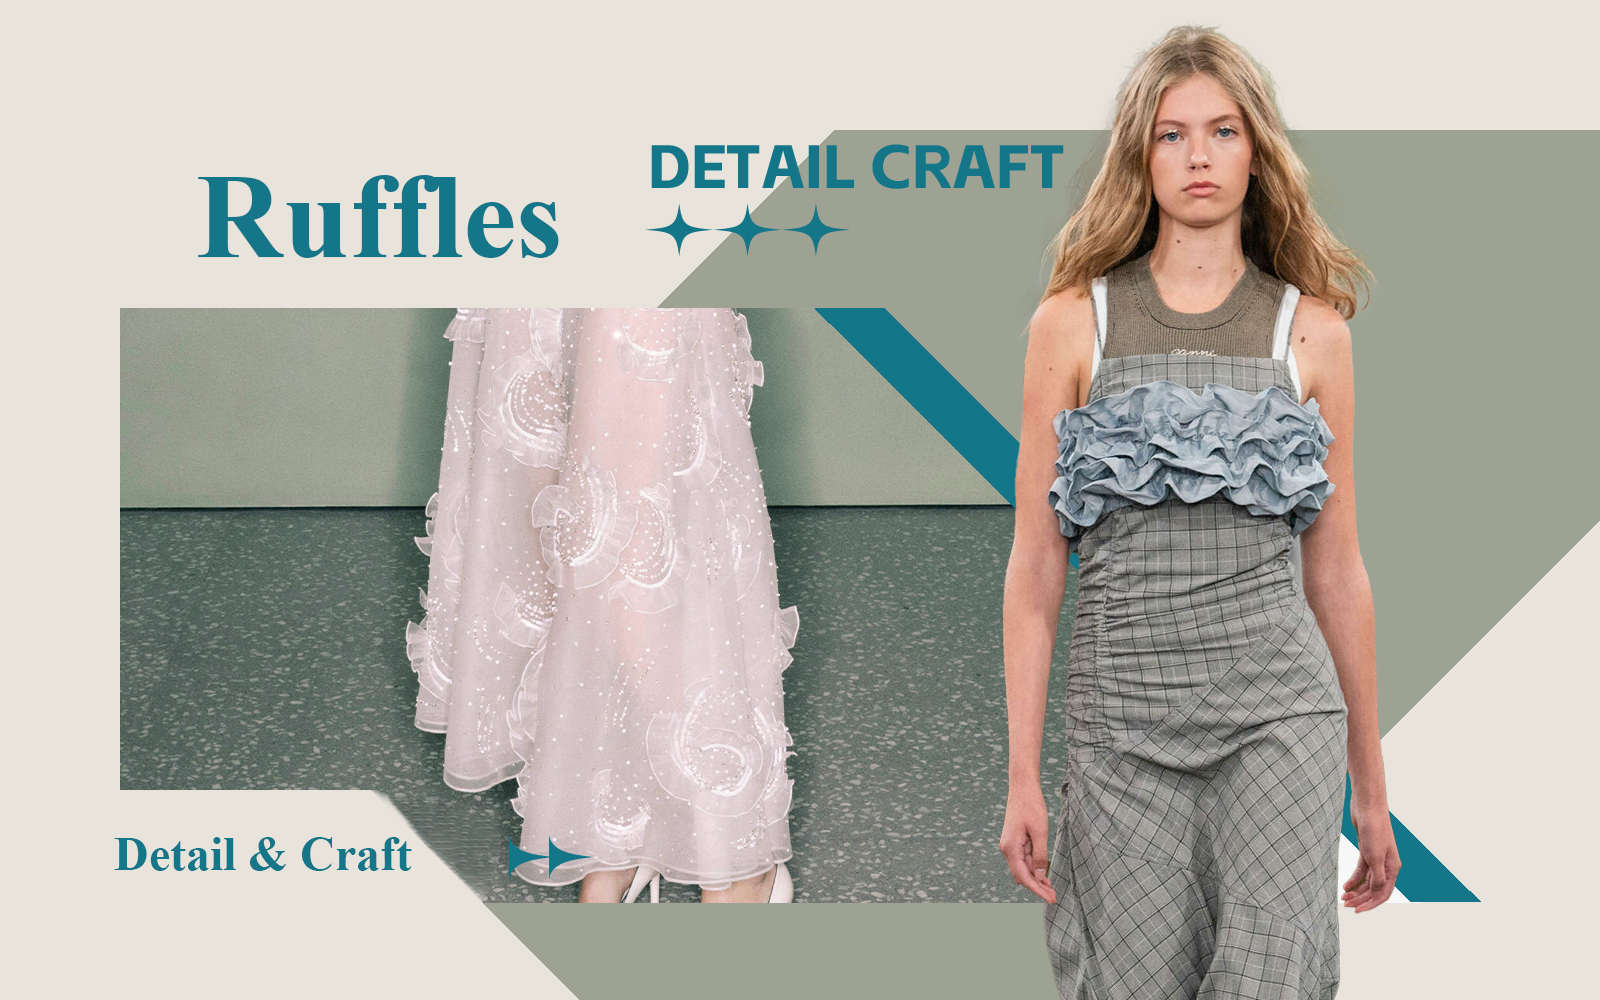 French Ruffles -- The Detail & Craft Trend for Womenswear